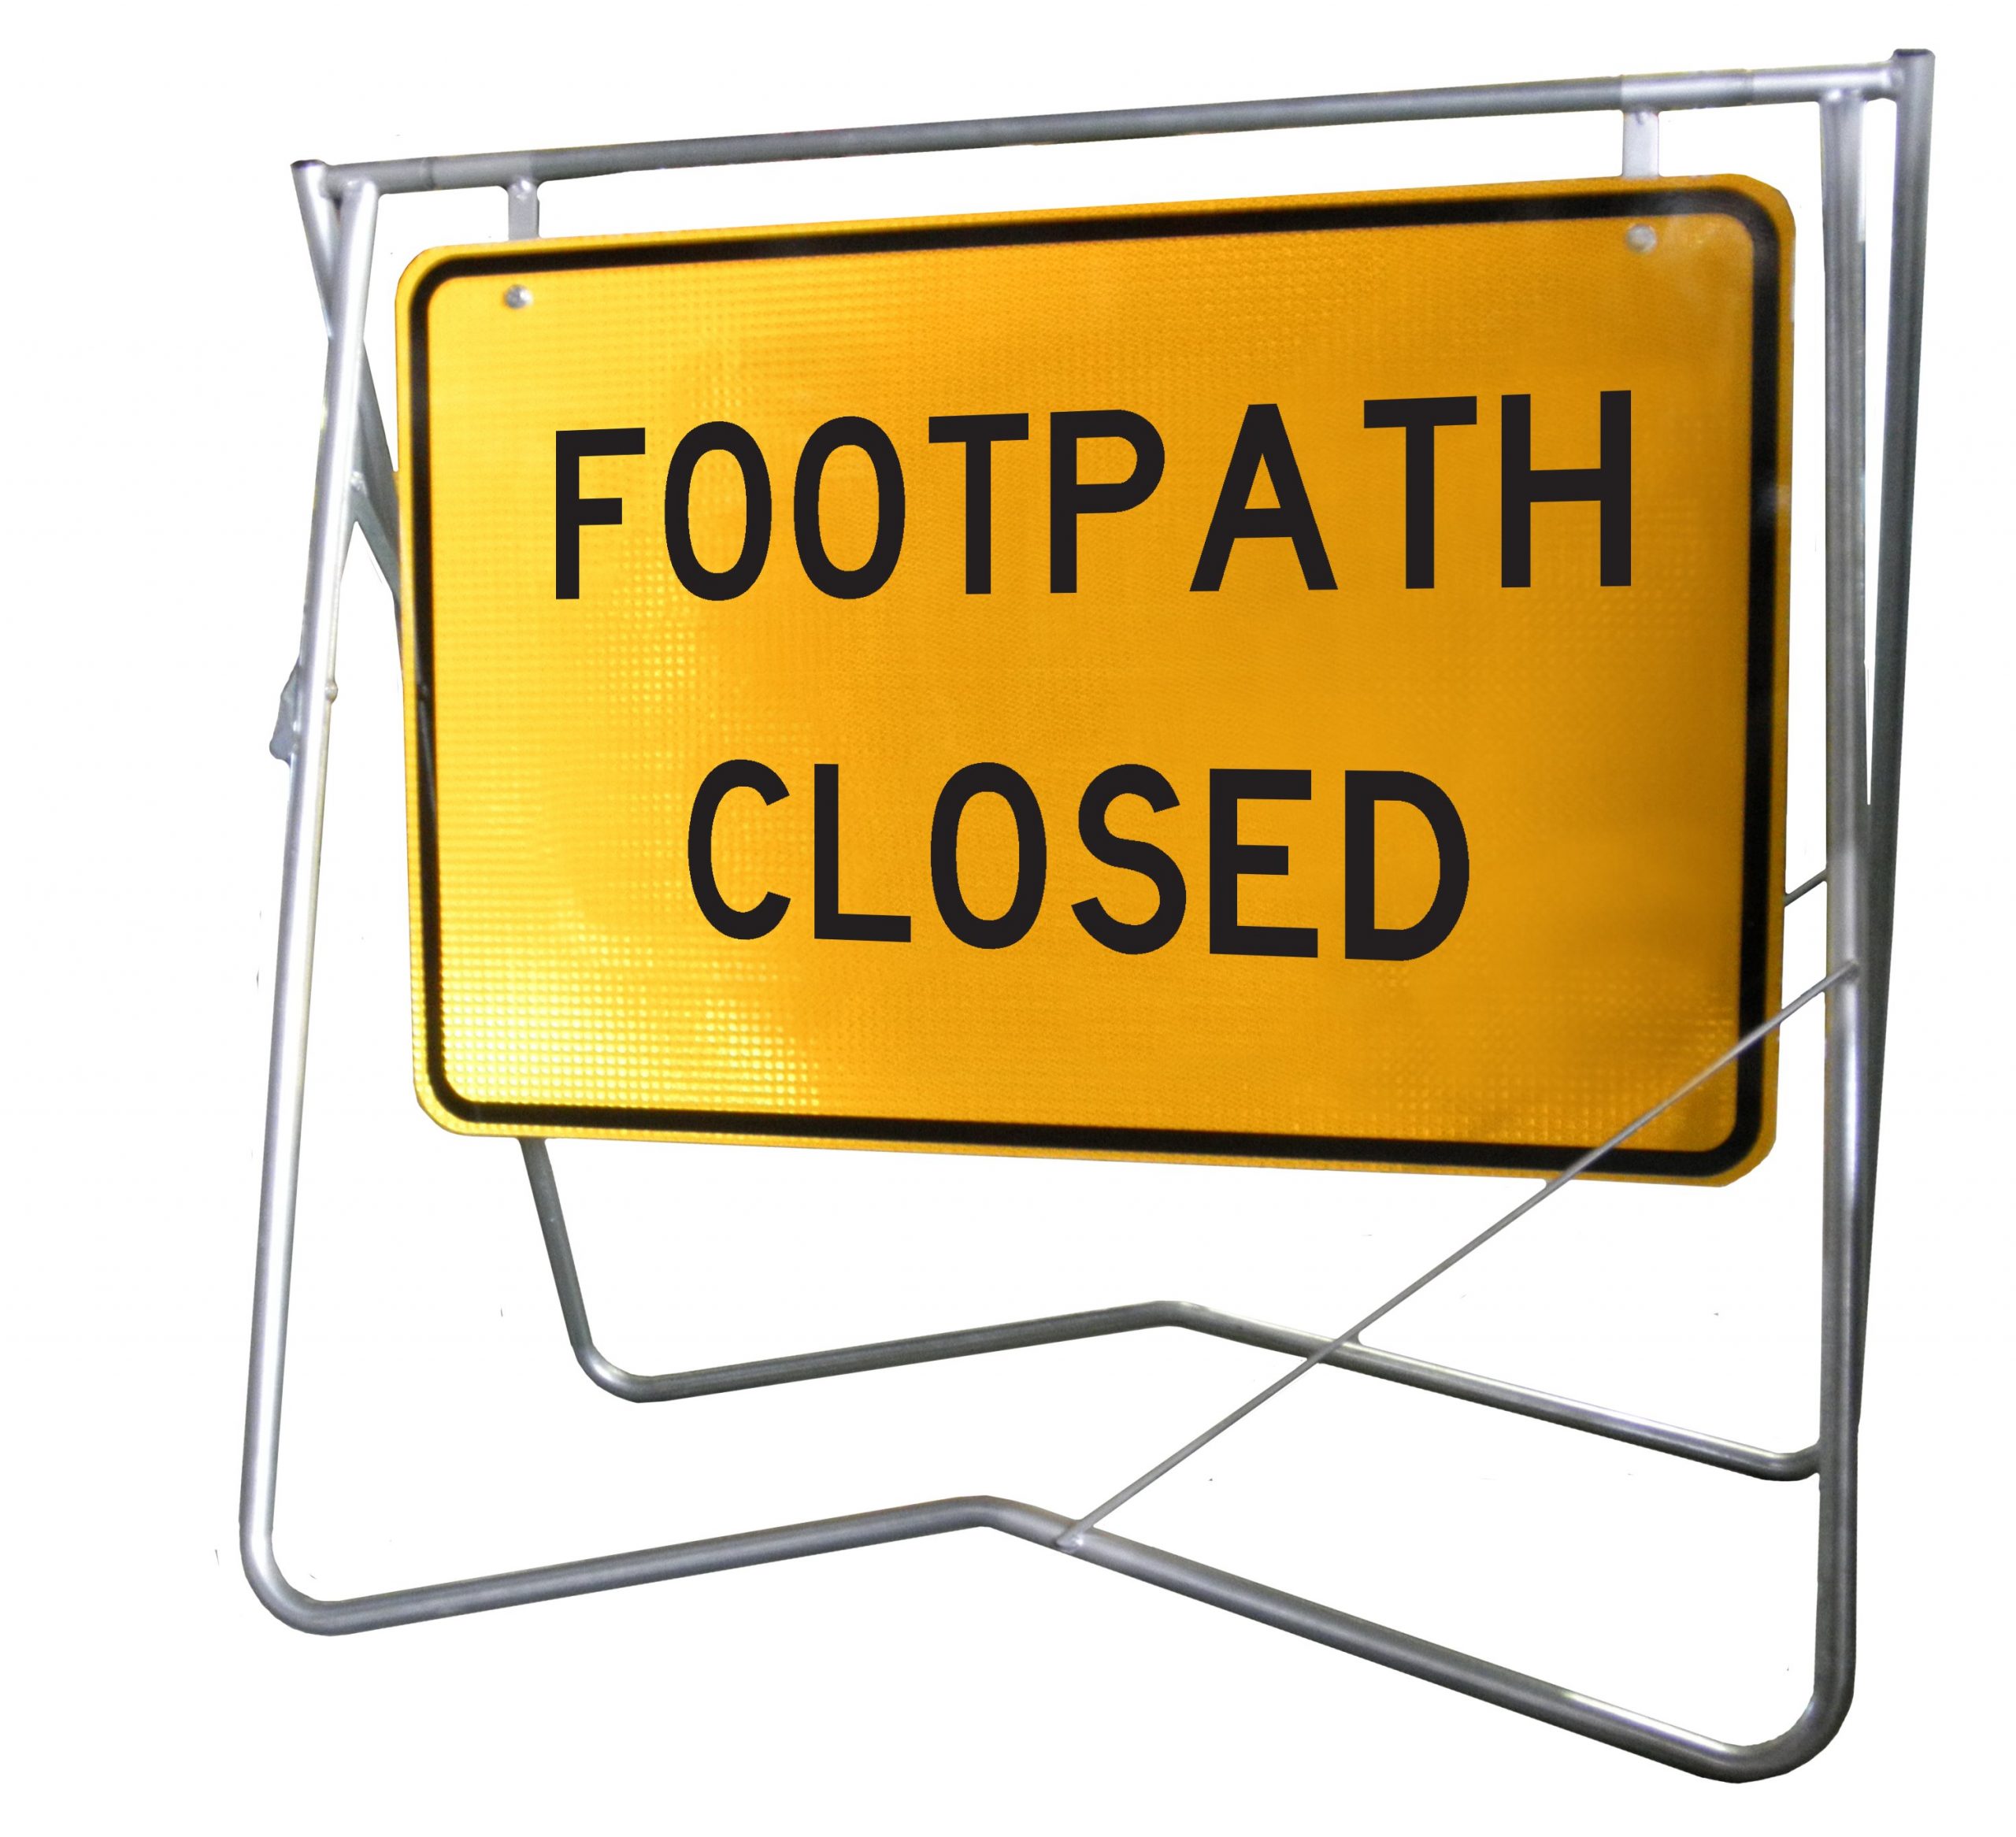 Footpath Closed - 900x600 - Mounted on swing stand